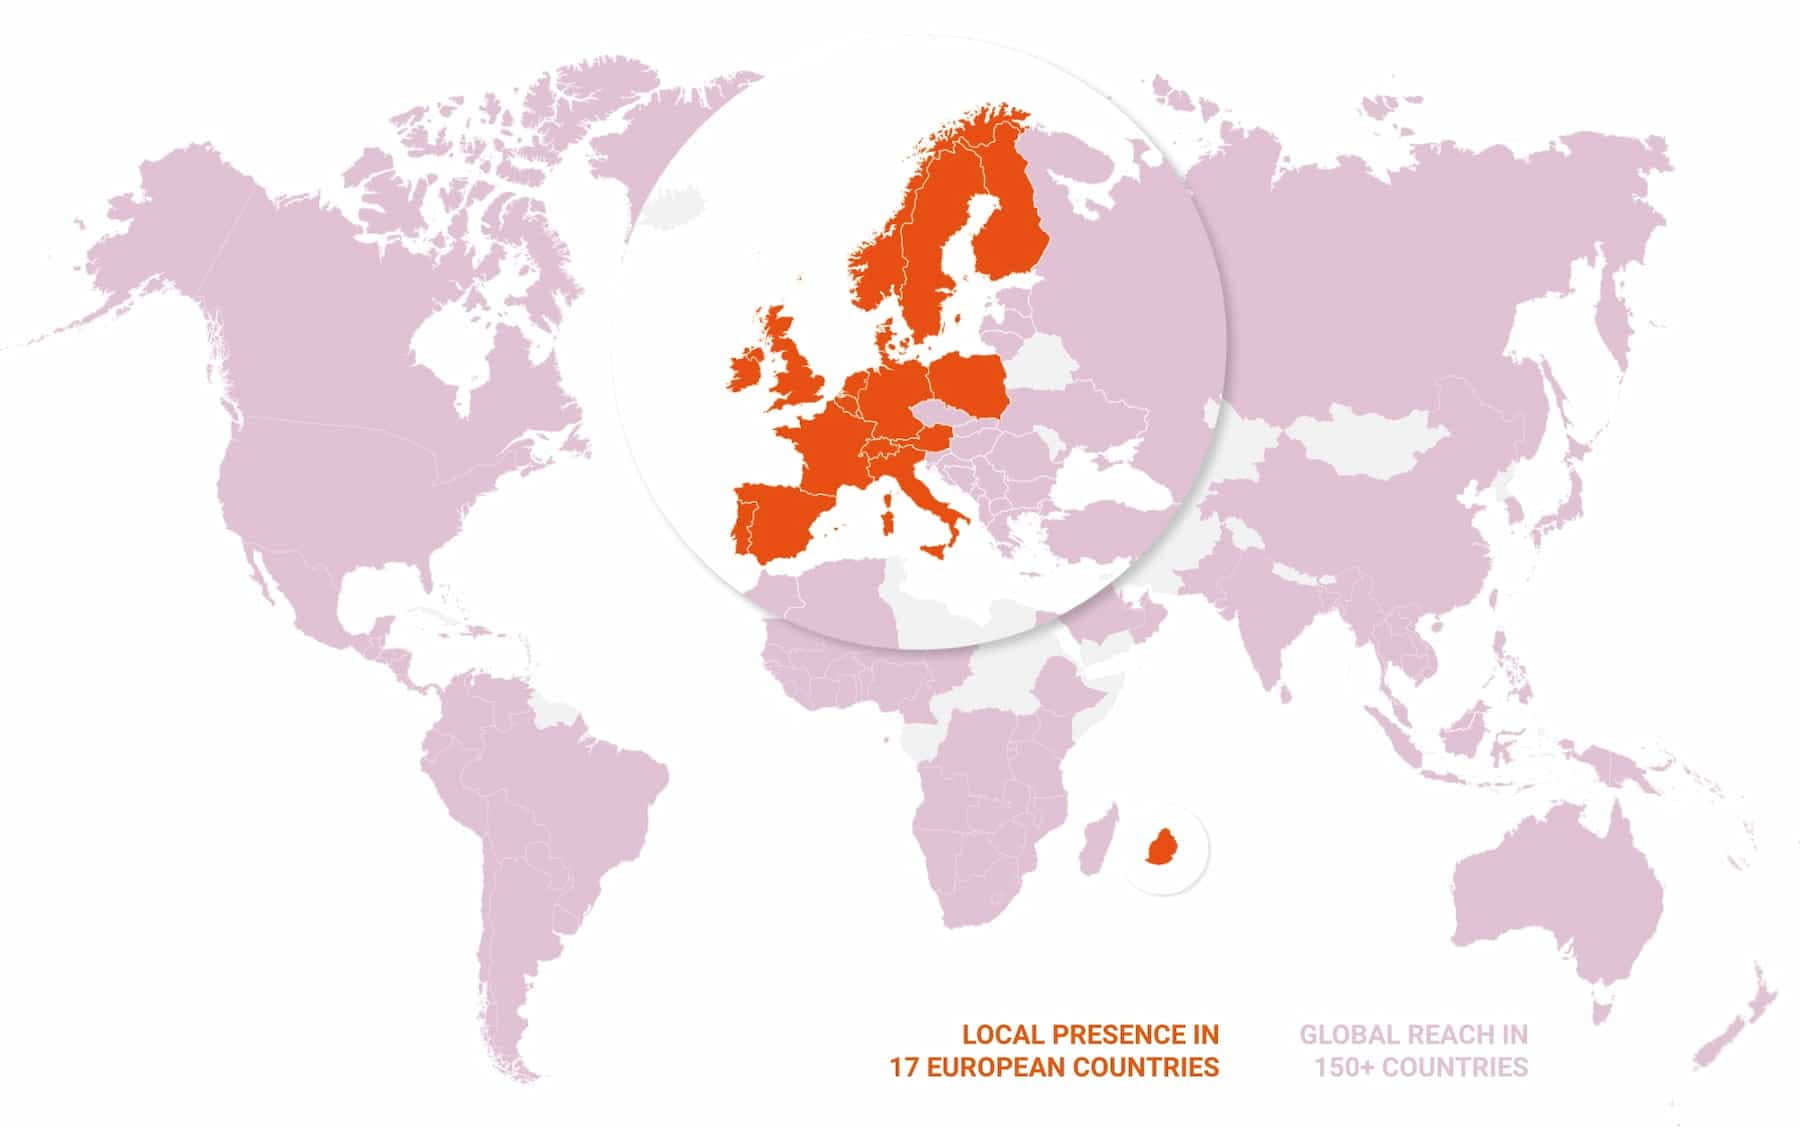 Local presence in 17 European countries, global reach in more than 150 countries